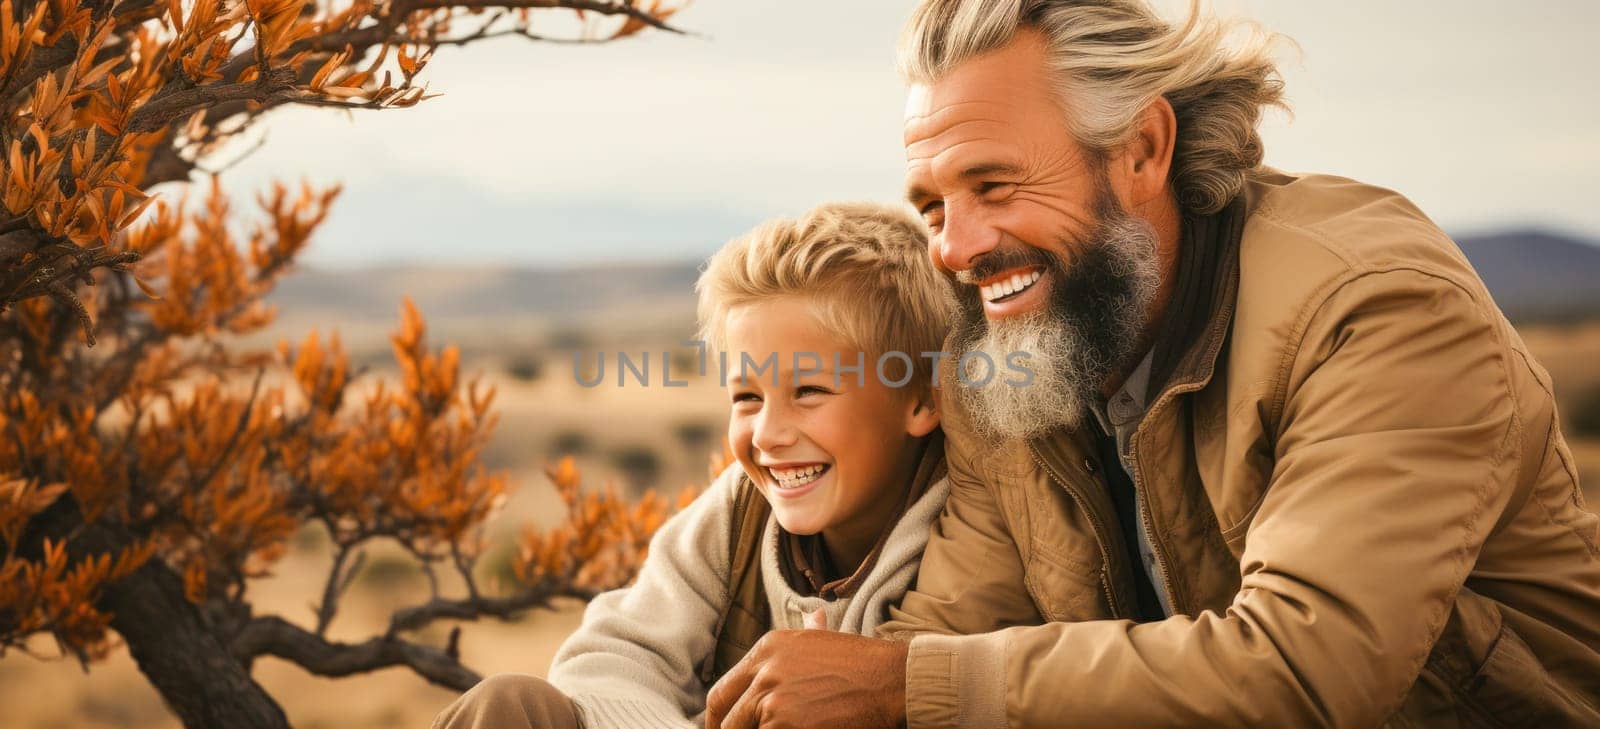 Grandson and grandfather in unity with nature, experiencing joy